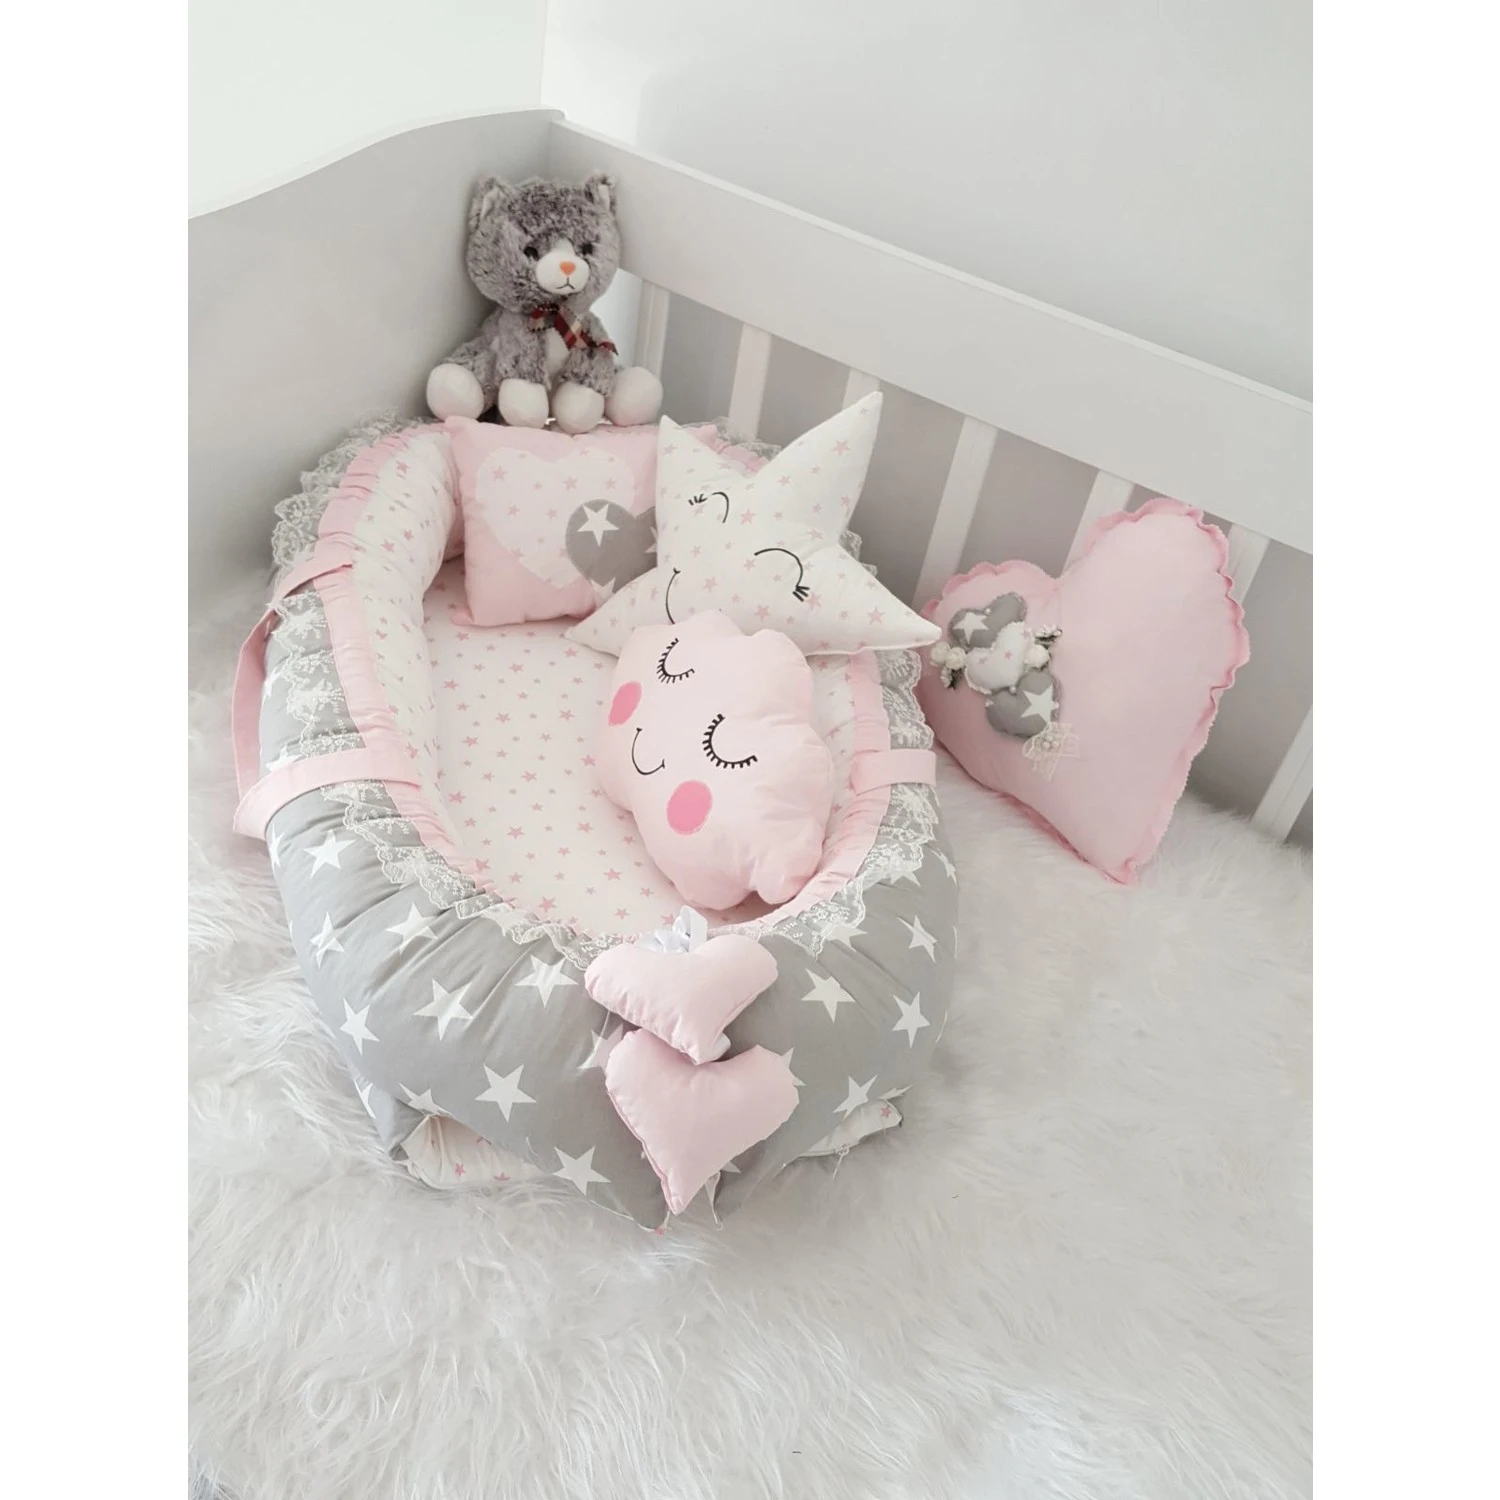 Jaju Baby Handmade Gray and Pink Pattern Design Luxe Orthopedic Babynest 5 Pieces Set Mother Side Portable Baby Bed Bedding Set